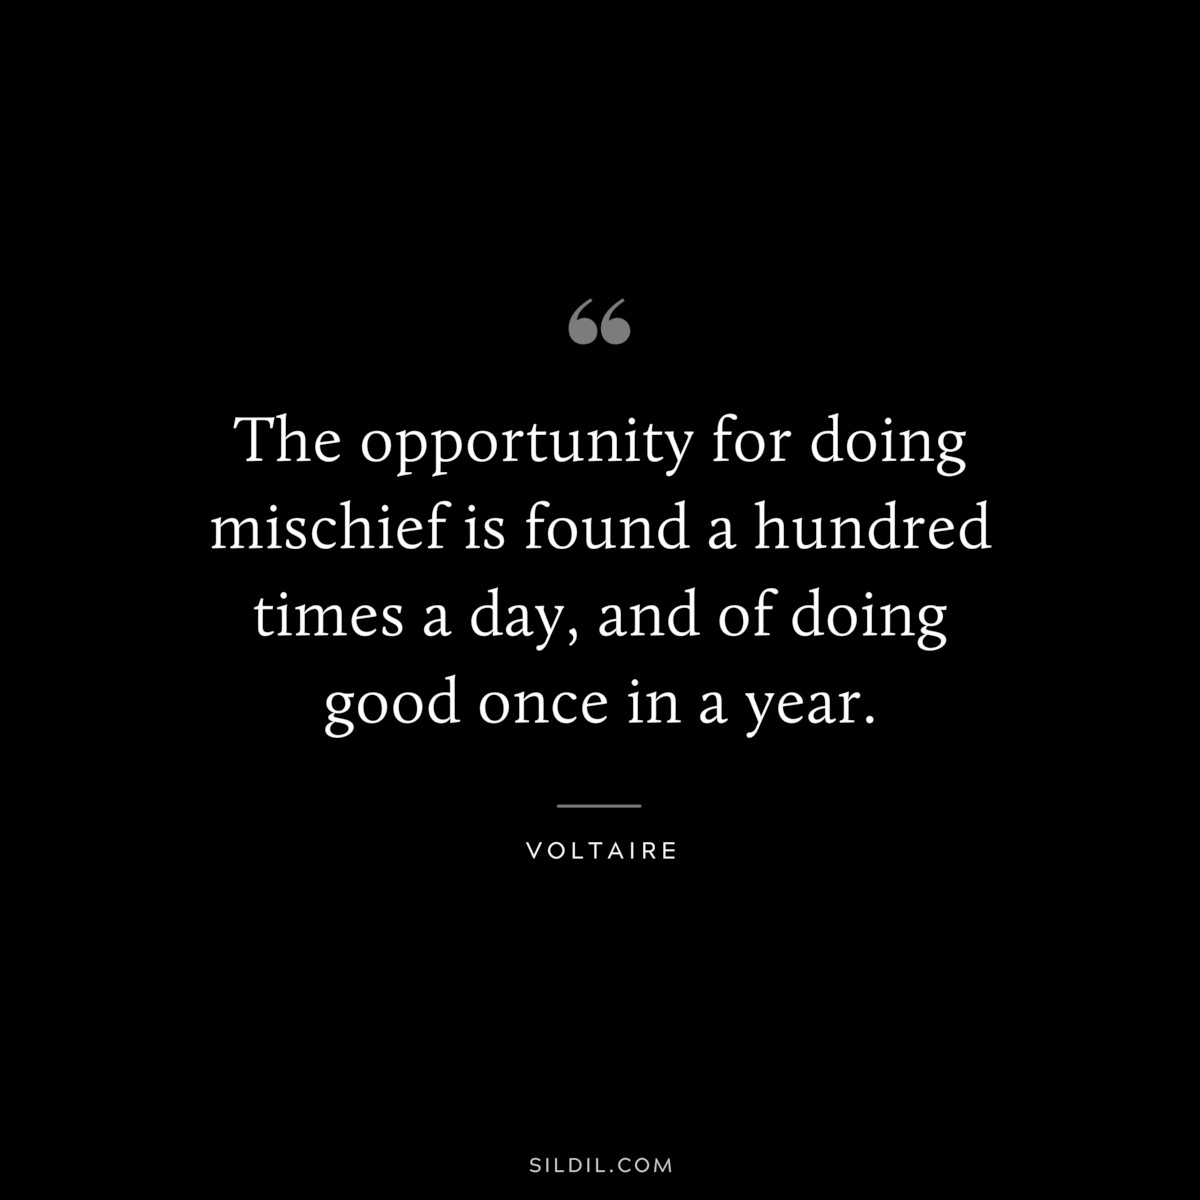 The opportunity for doing mischief is found a hundred times a day, and of doing good once in a year. ― Voltaire